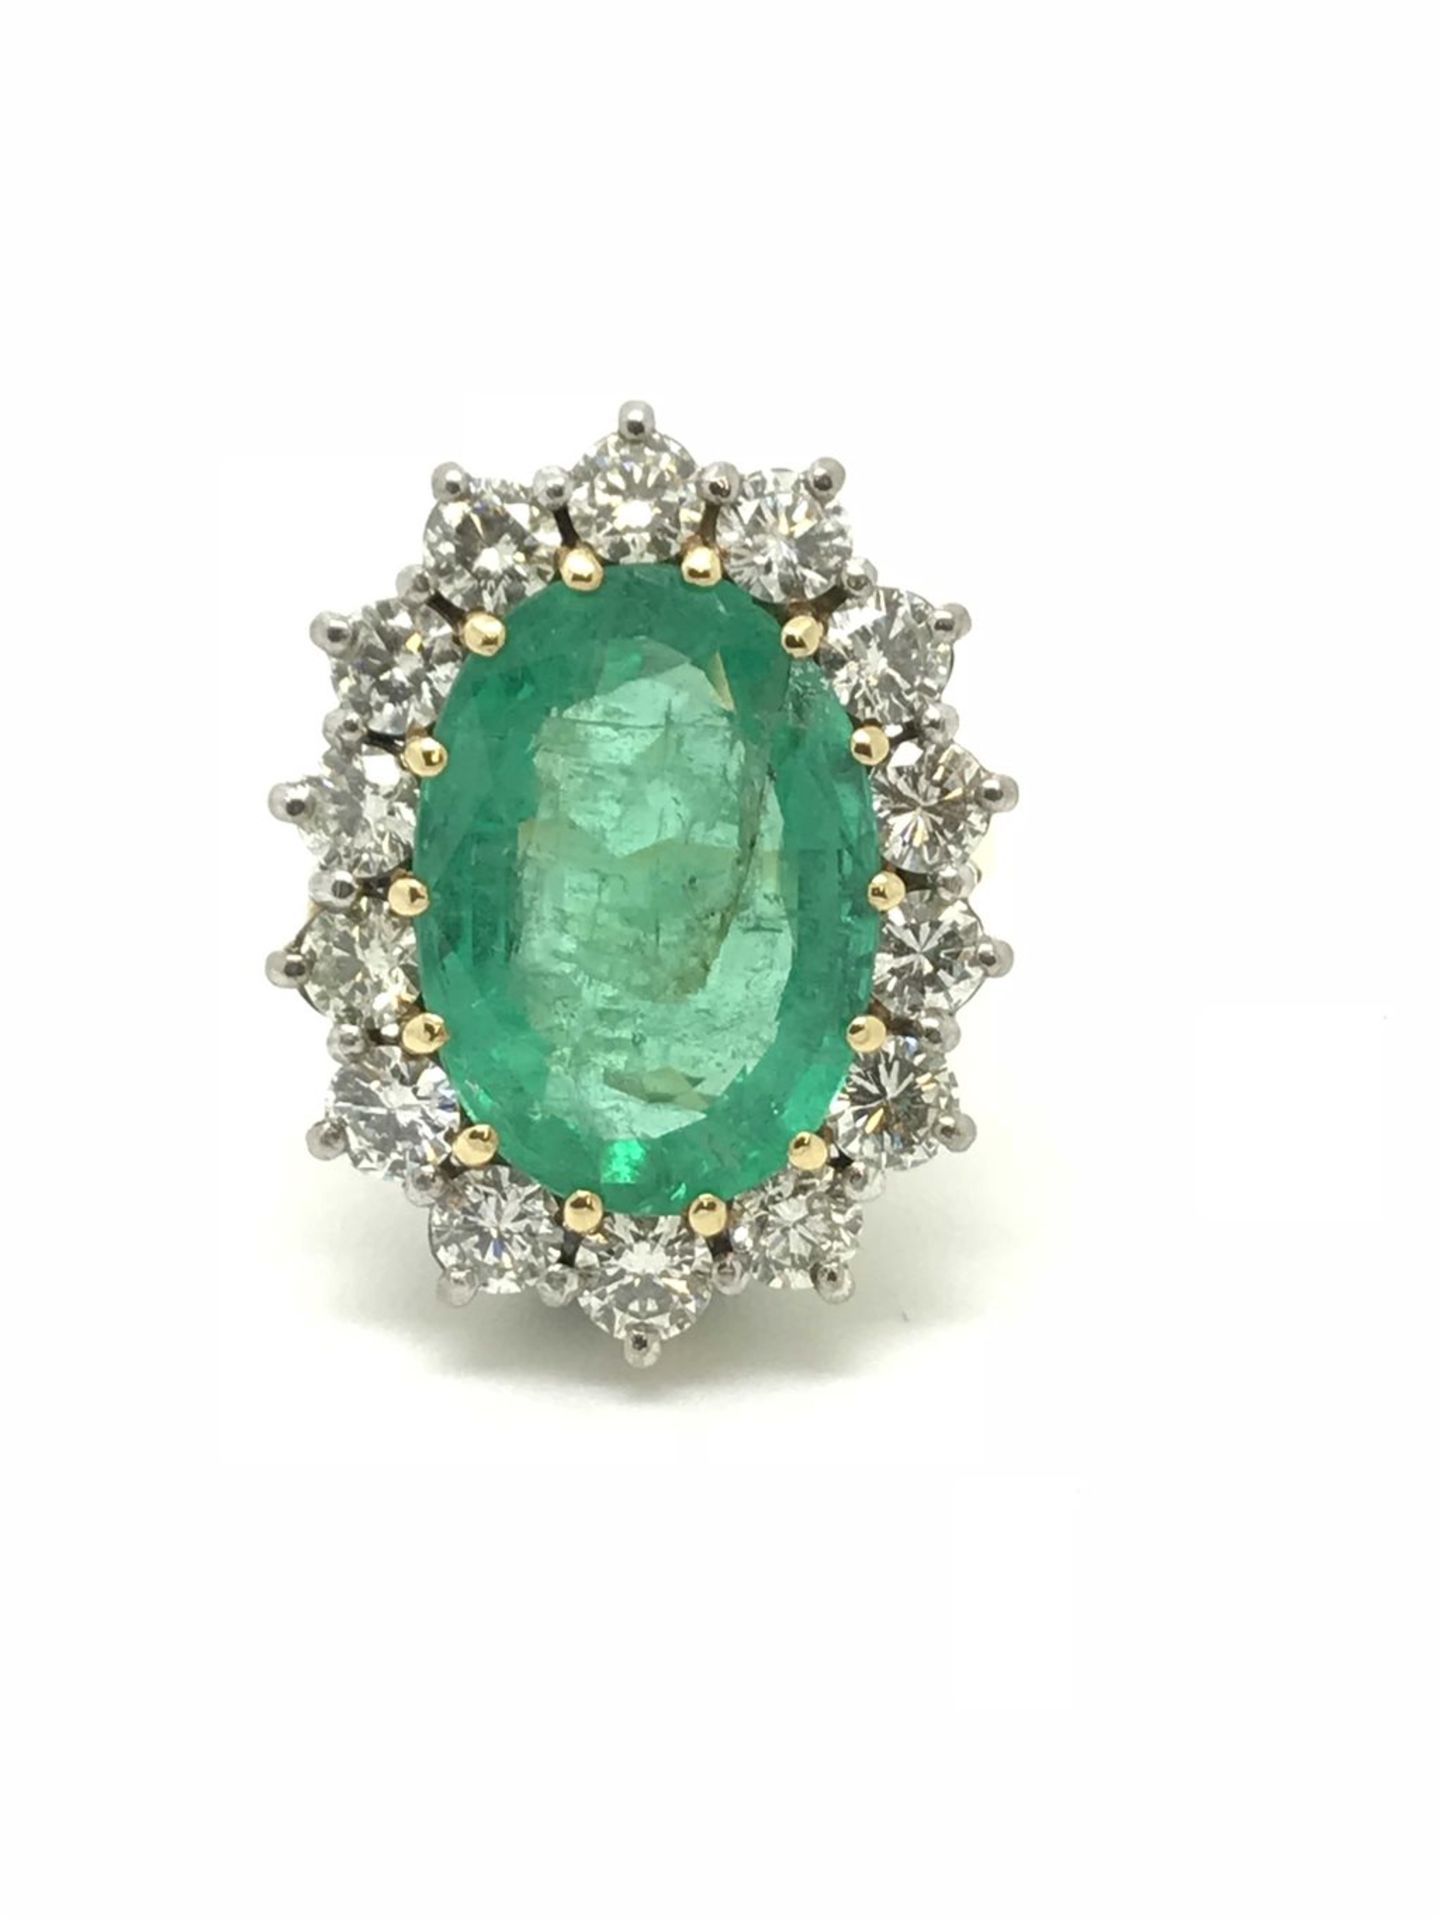 Emerald (6.93ct) & Diamond (2.10ct) Large Cluster Ring - 18ct